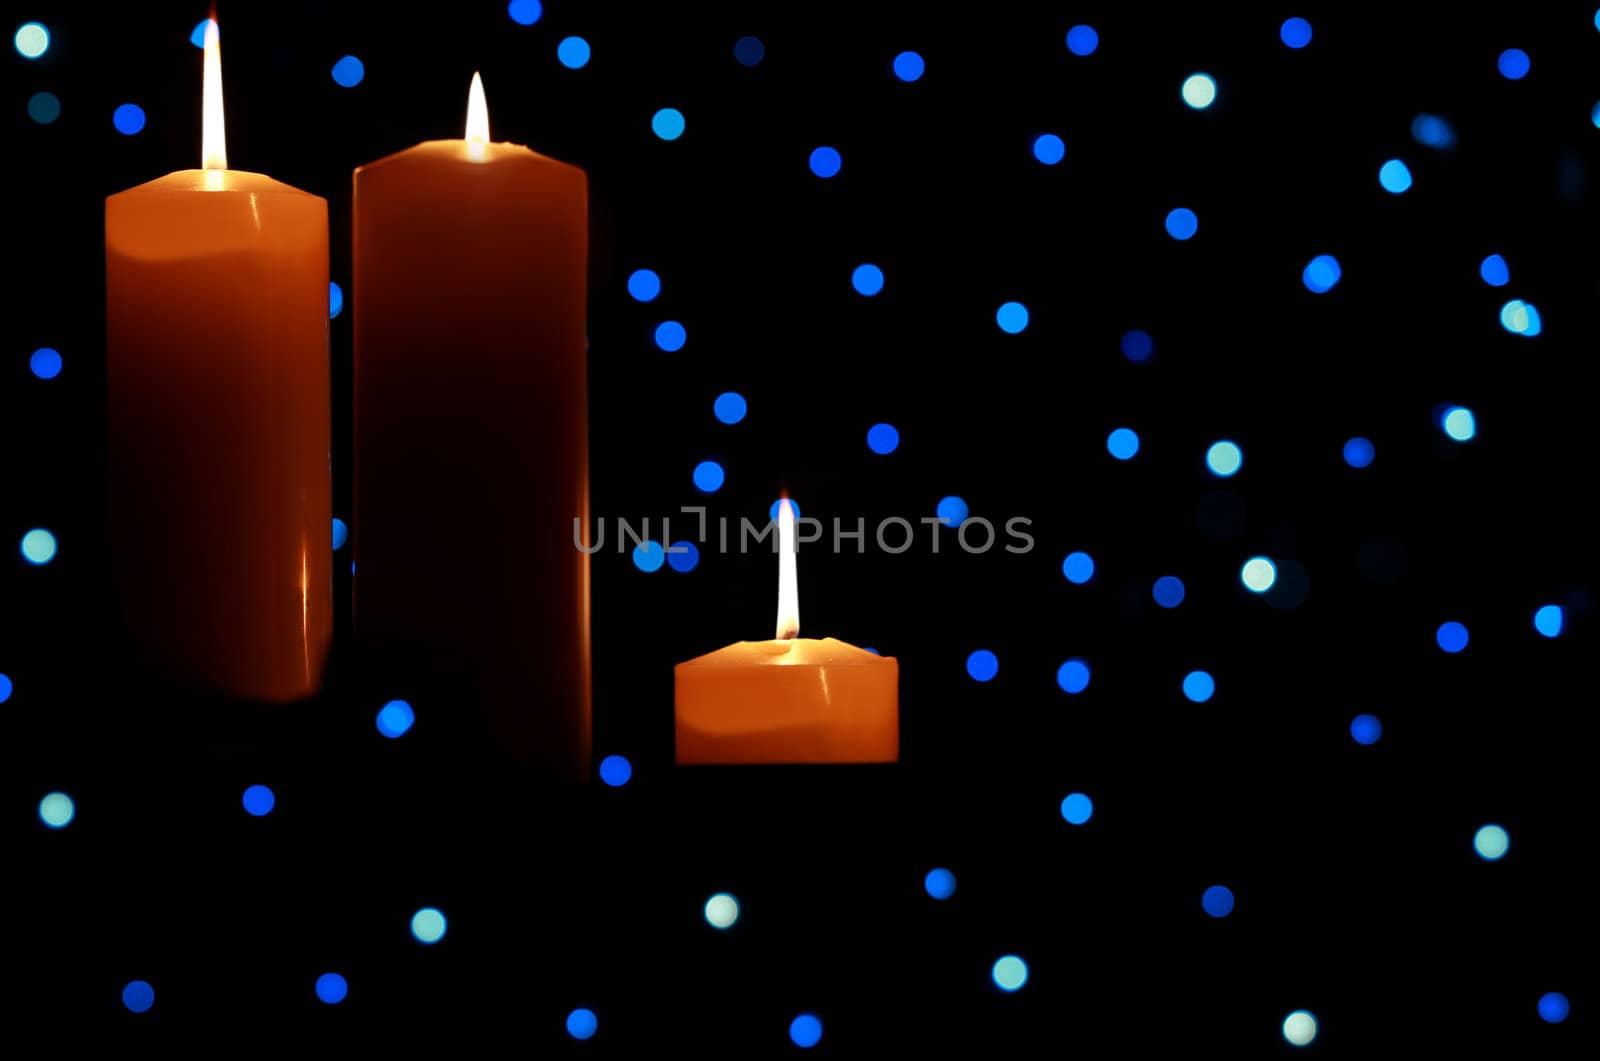 Three burning candles with blue lights in background, dark shadows